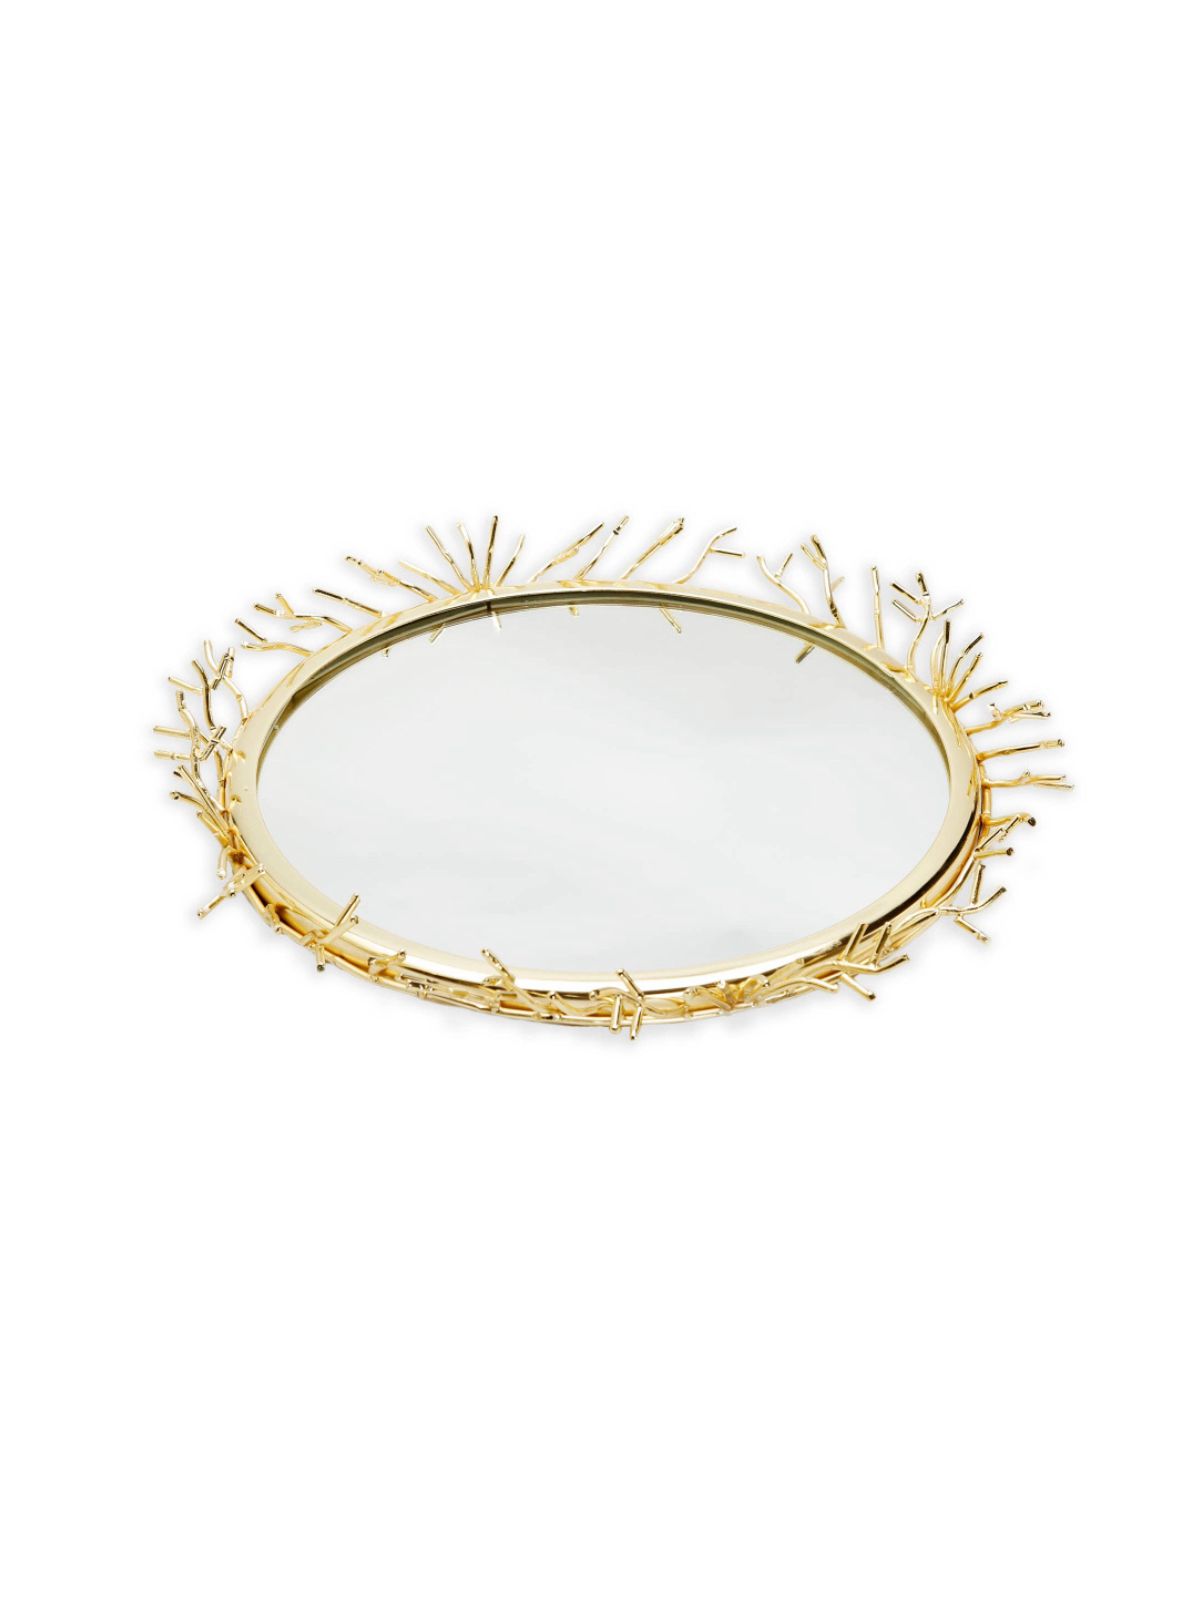 Round Decorative Mirror Tray with Stainless Steel Gold Twigs Design, 13D.